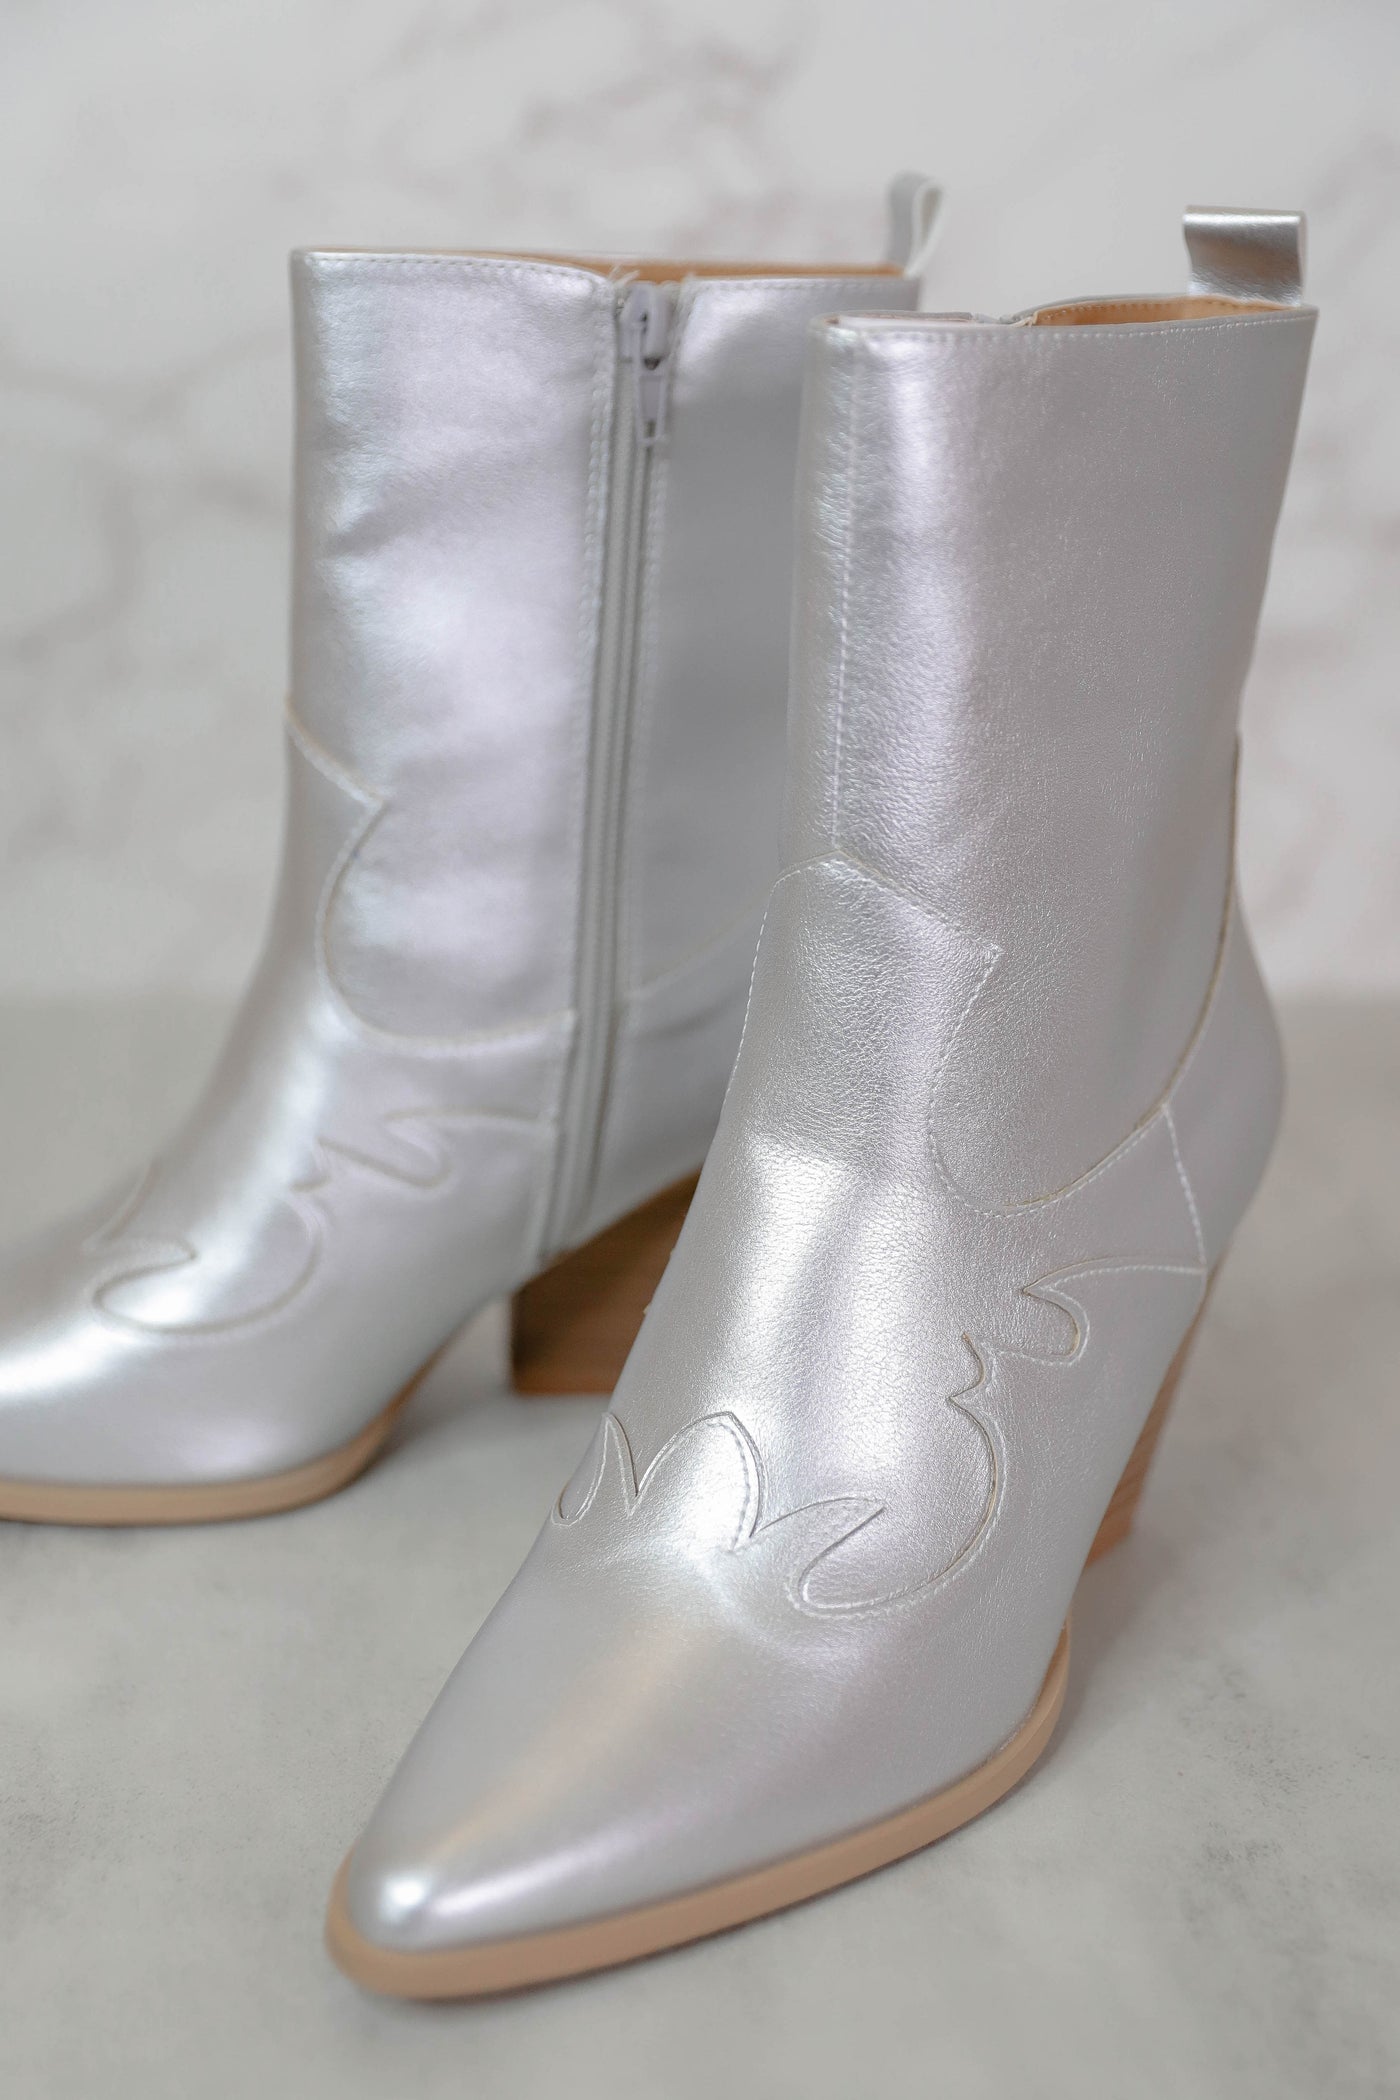 Chic Western Style Boots- Silver Metallic Booties- Mid Calf Booties- Nashville Boots